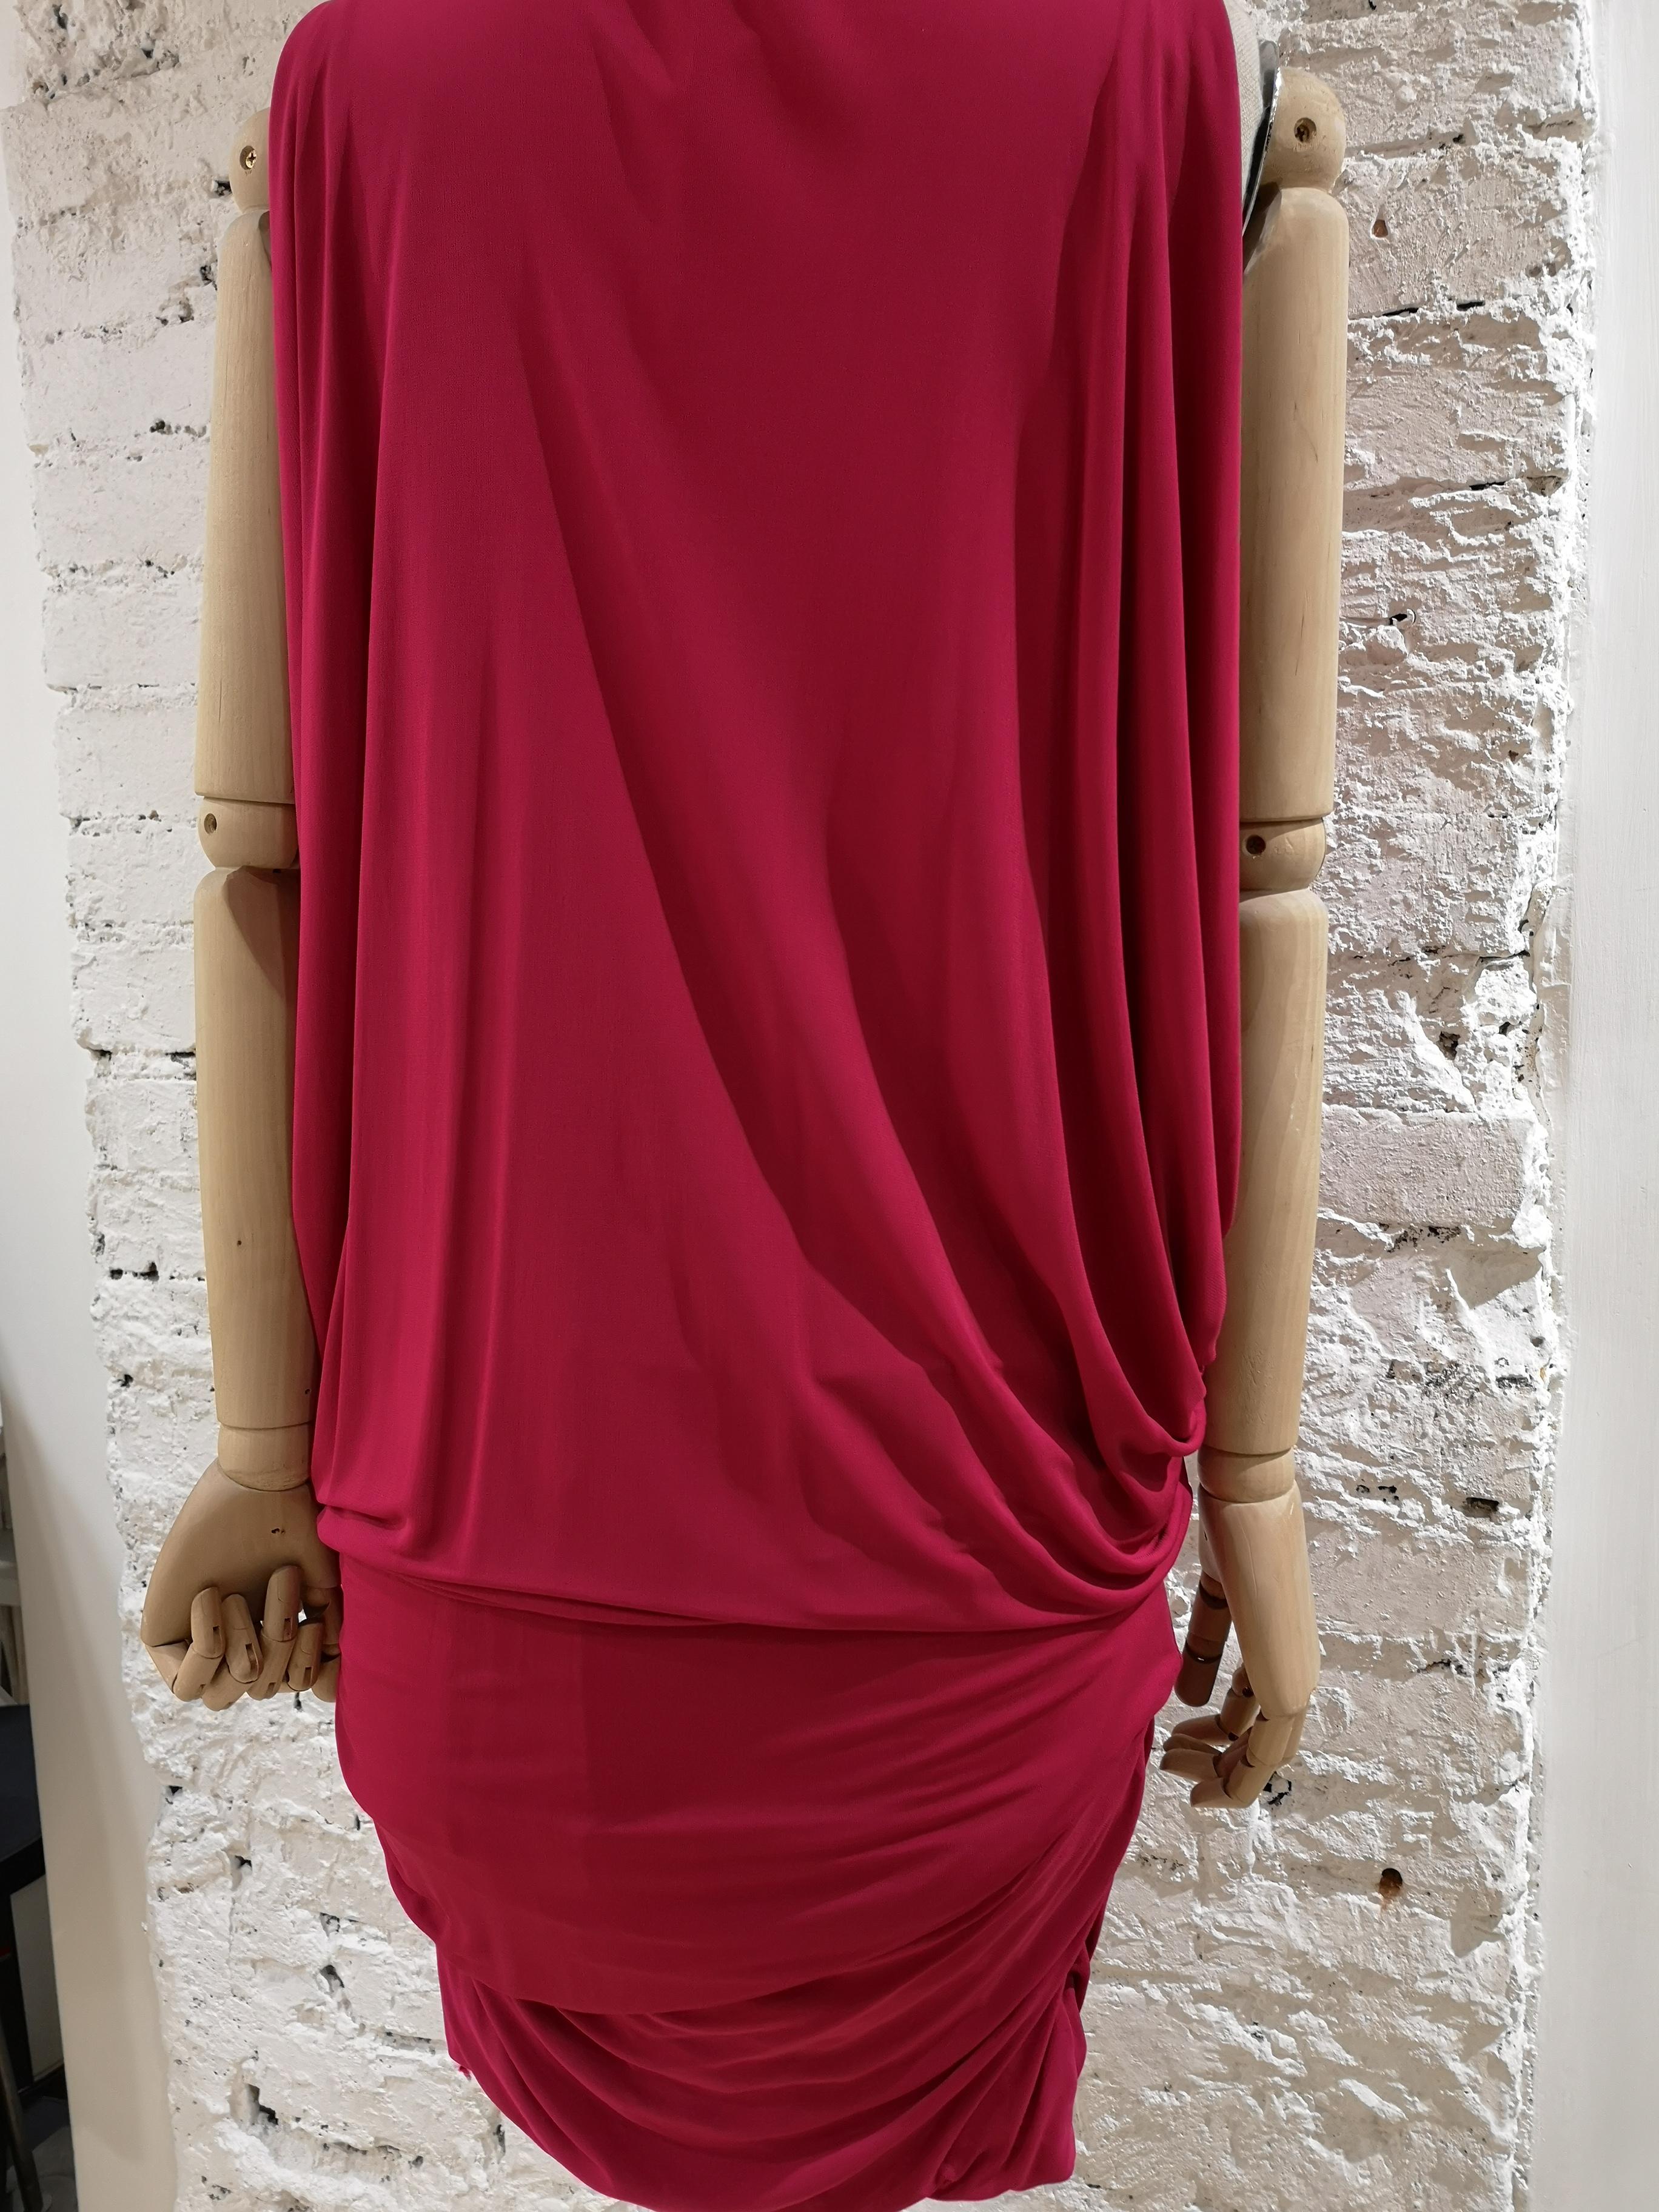 Alexander McQueen Fucsia viscose dress 
McQueen adjustable flared dress
totally made in italy
size 40
composition: viscose